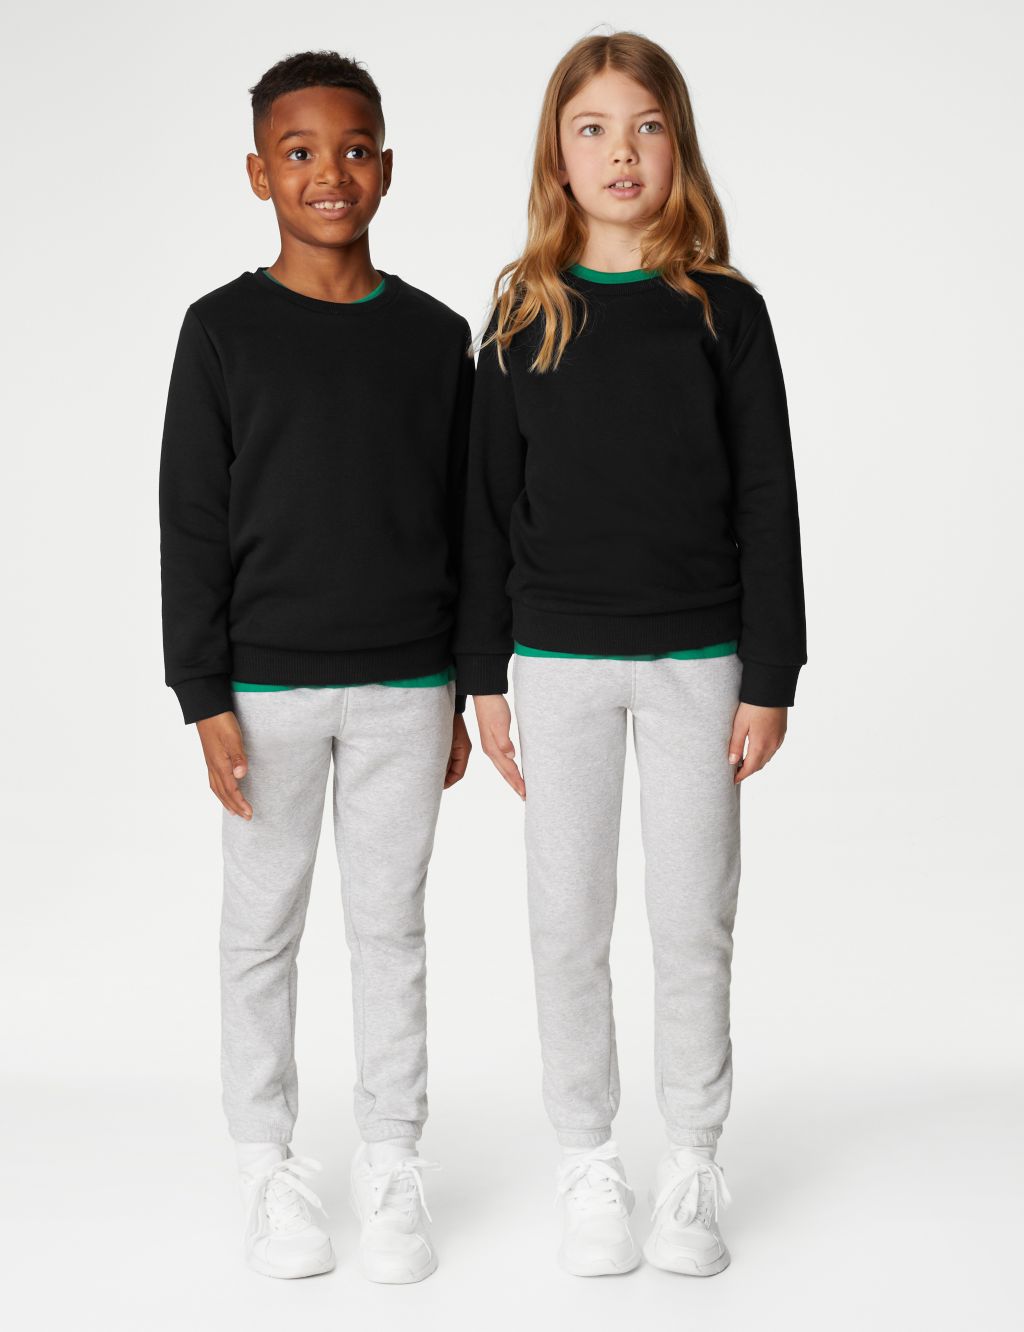 Buy Black School Jumpers from the M&S UK Online Shop